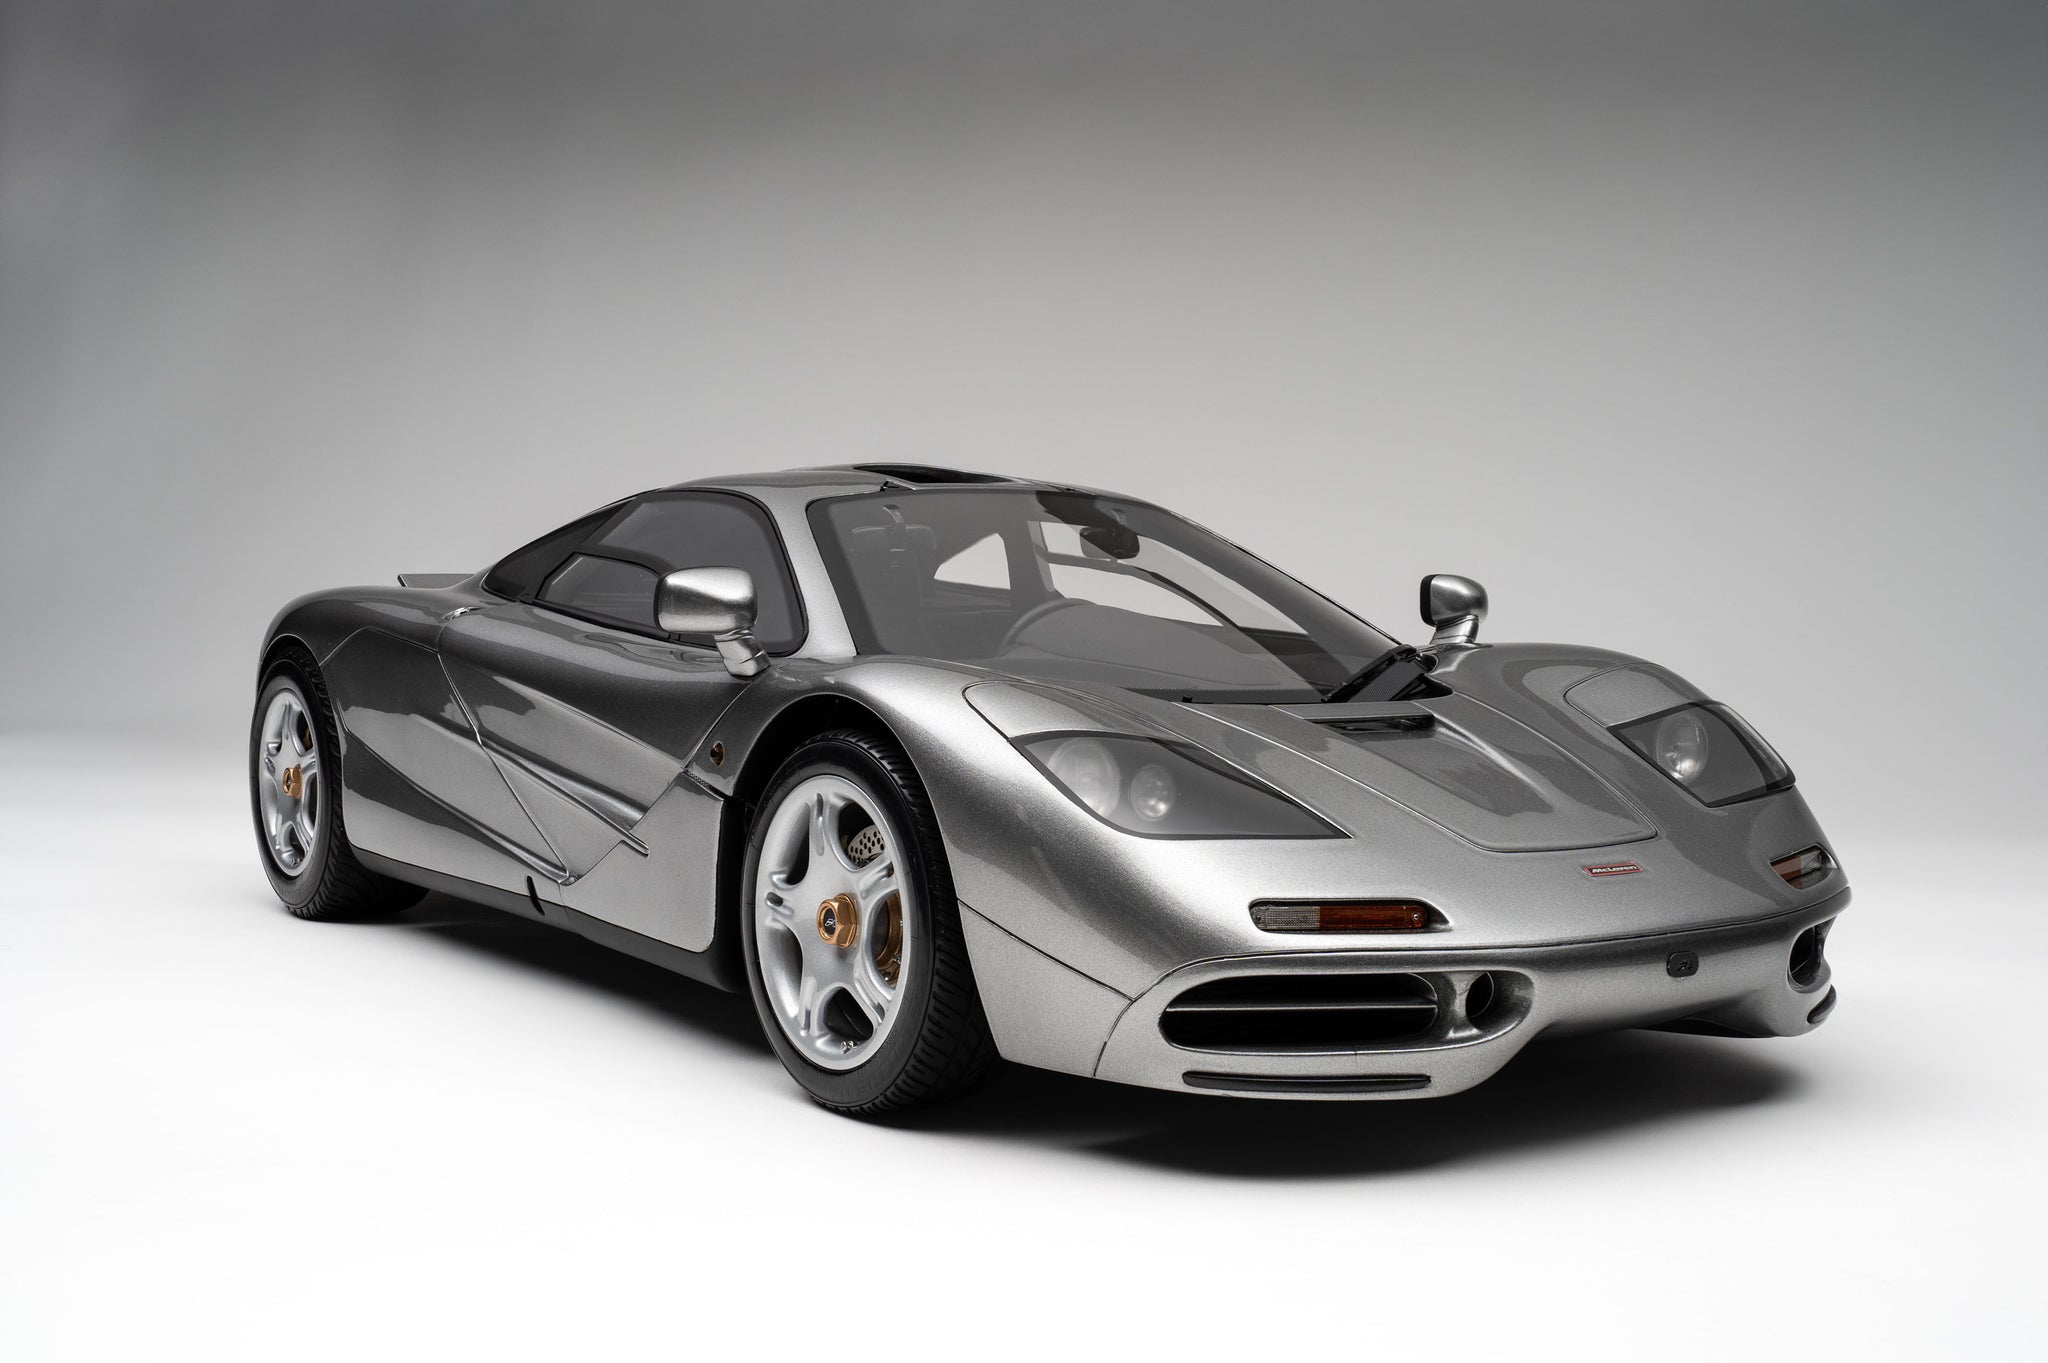 McLaren F1 at 1:8 scale by Amalgam Collection